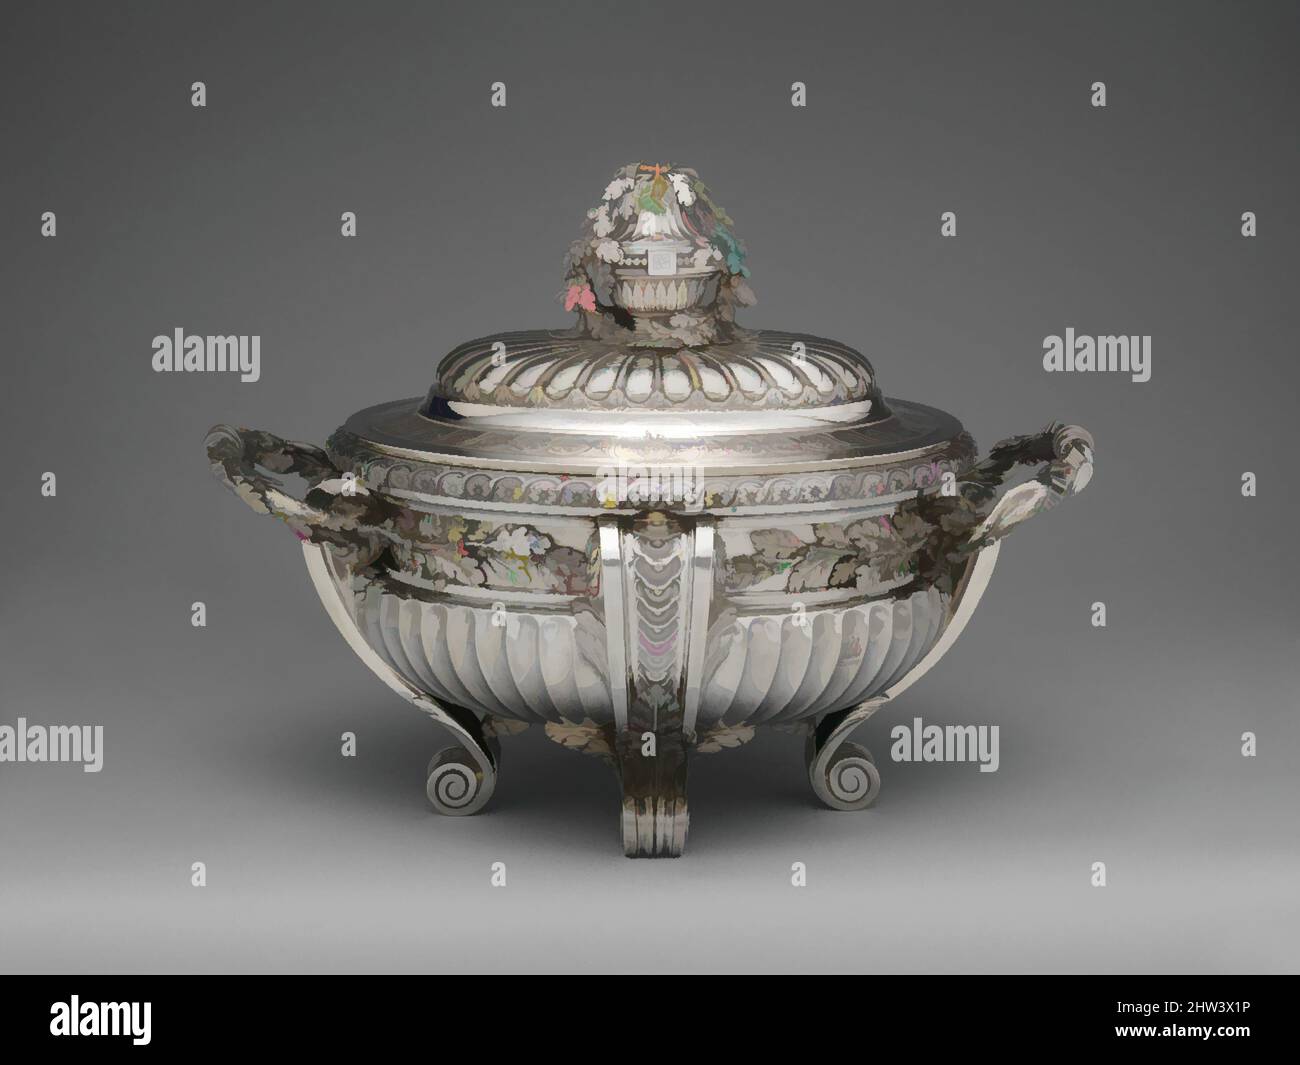 Art inspired by Tureen with cover and liner, Jacques-Nicolas Roettiers (1736–1788, master 1765, retired 1777), 1775–76, French, Paris, Silver, H. 12-1/4 in. (31.1 cm.); L. 15-1/2 in. (39.4 cm.); D. 9-7/8 in. (25.1 cm.), Metalwork-Silver, Jacques-Nicolas Roettiers (1736–1788, master, Classic works modernized by Artotop with a splash of modernity. Shapes, color and value, eye-catching visual impact on art. Emotions through freedom of artworks in a contemporary way. A timeless message pursuing a wildly creative new direction. Artists turning to the digital medium and creating the Artotop NFT Stock Photo